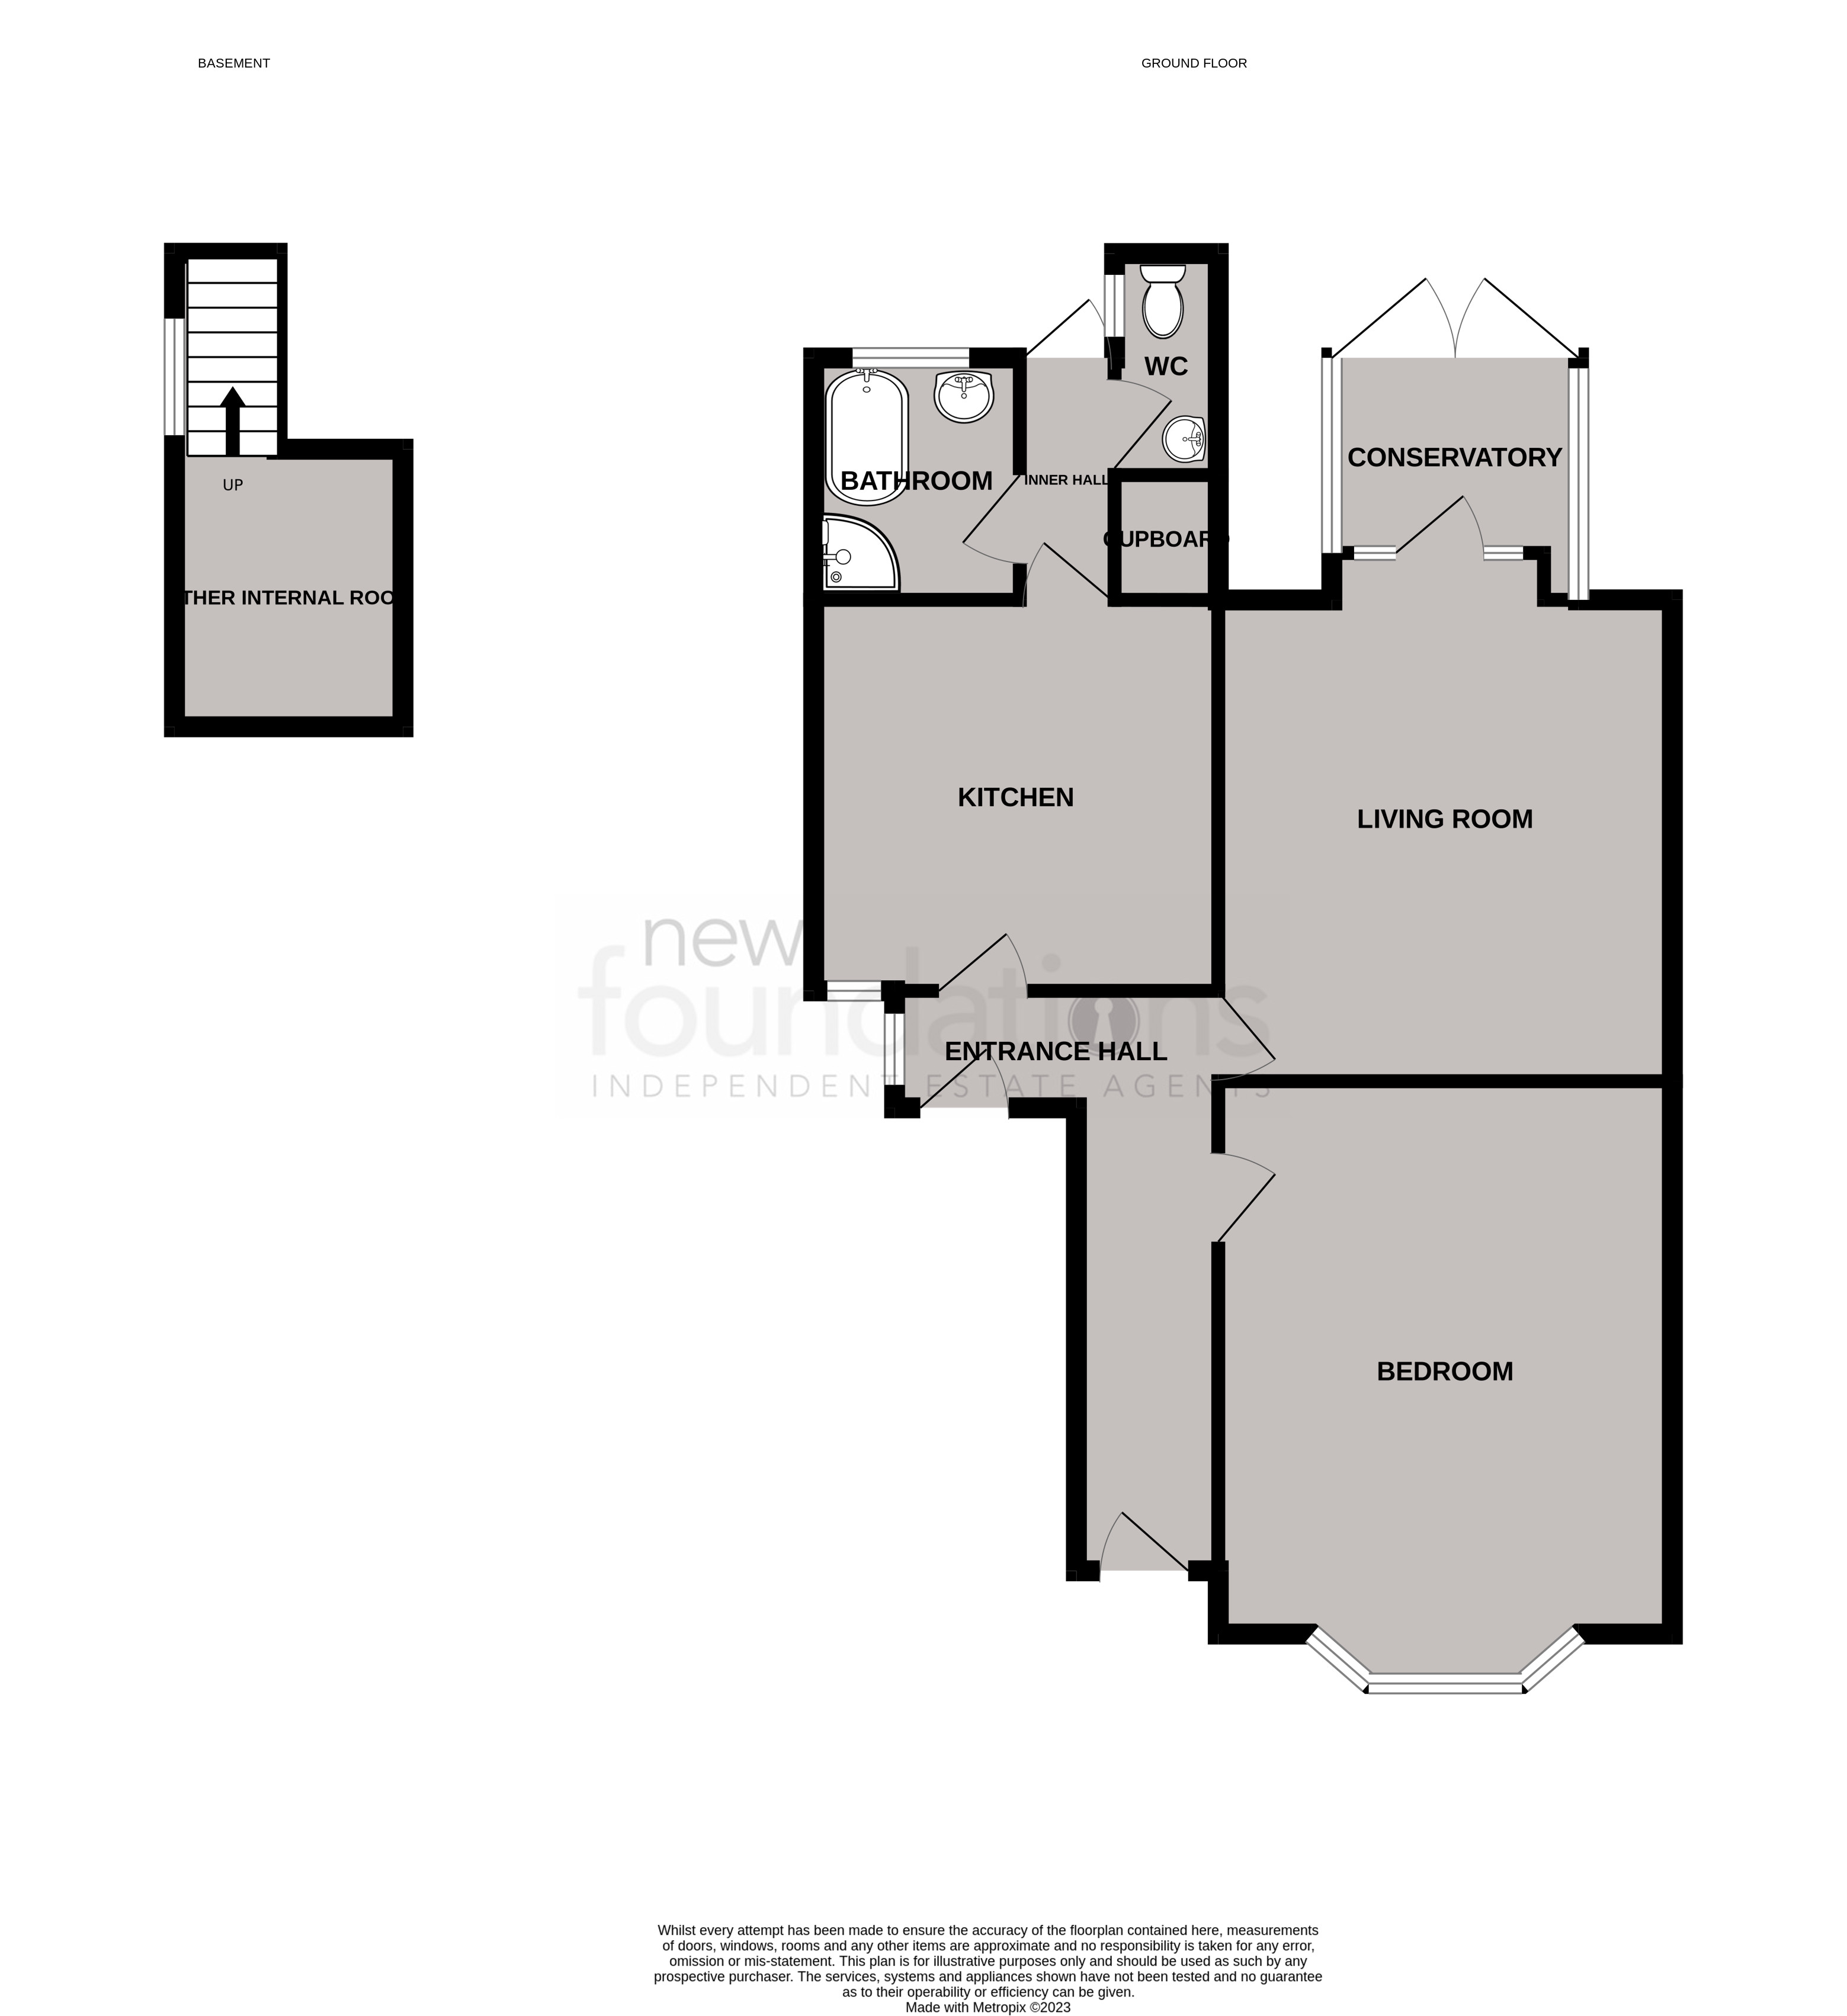 Floorplans For Albany Road, Bexhill-on-Sea, East Sussex